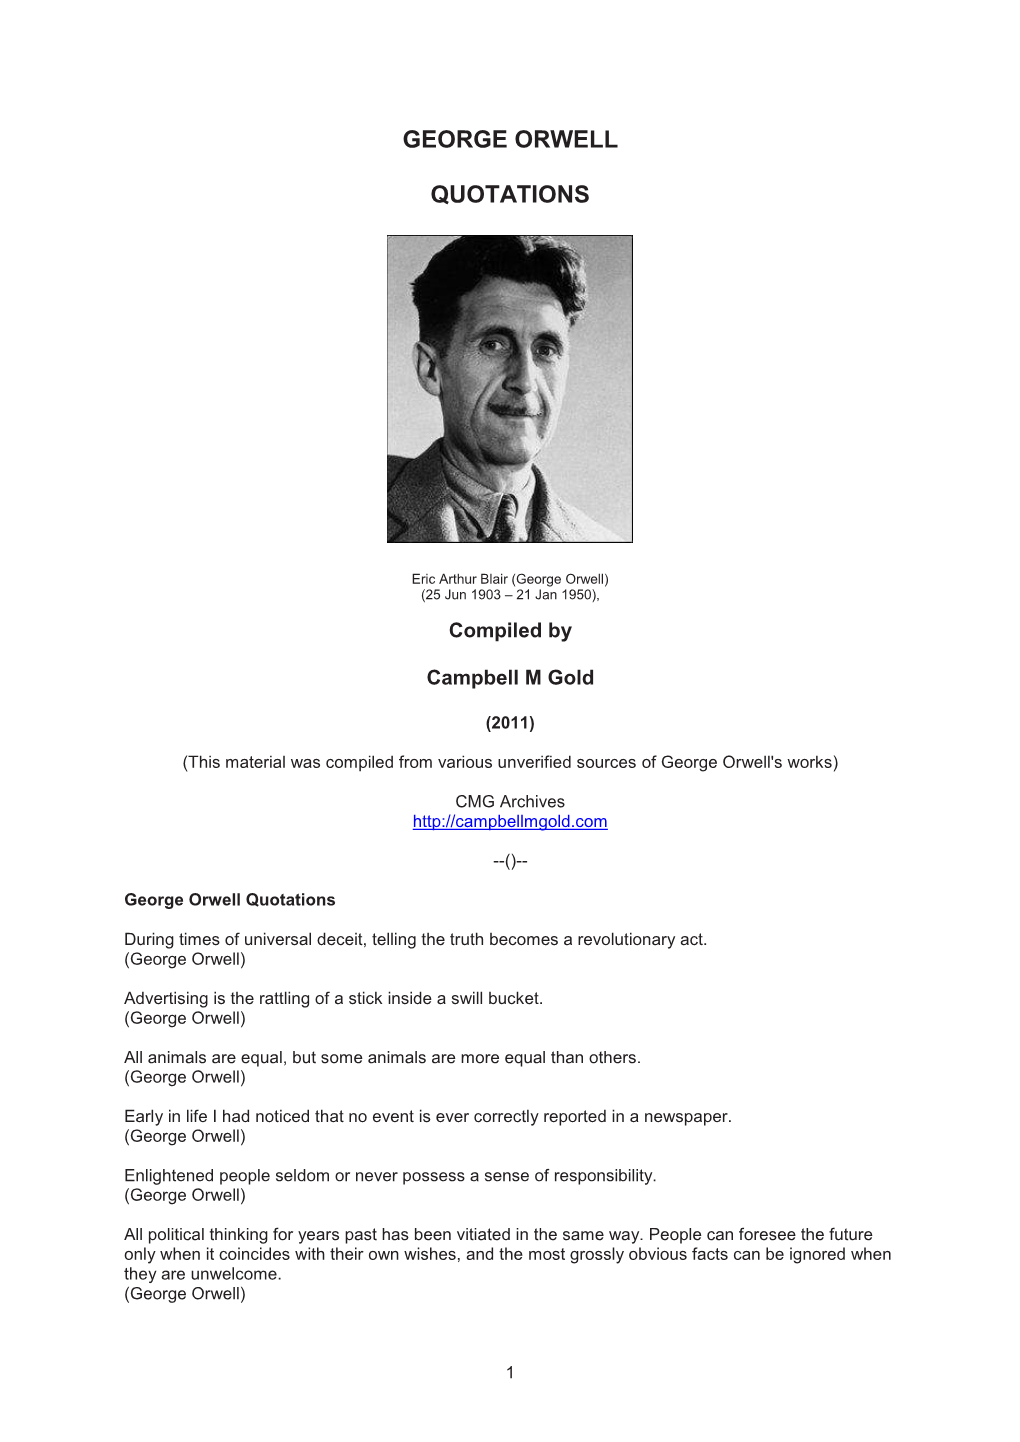 George Orwell Quotations